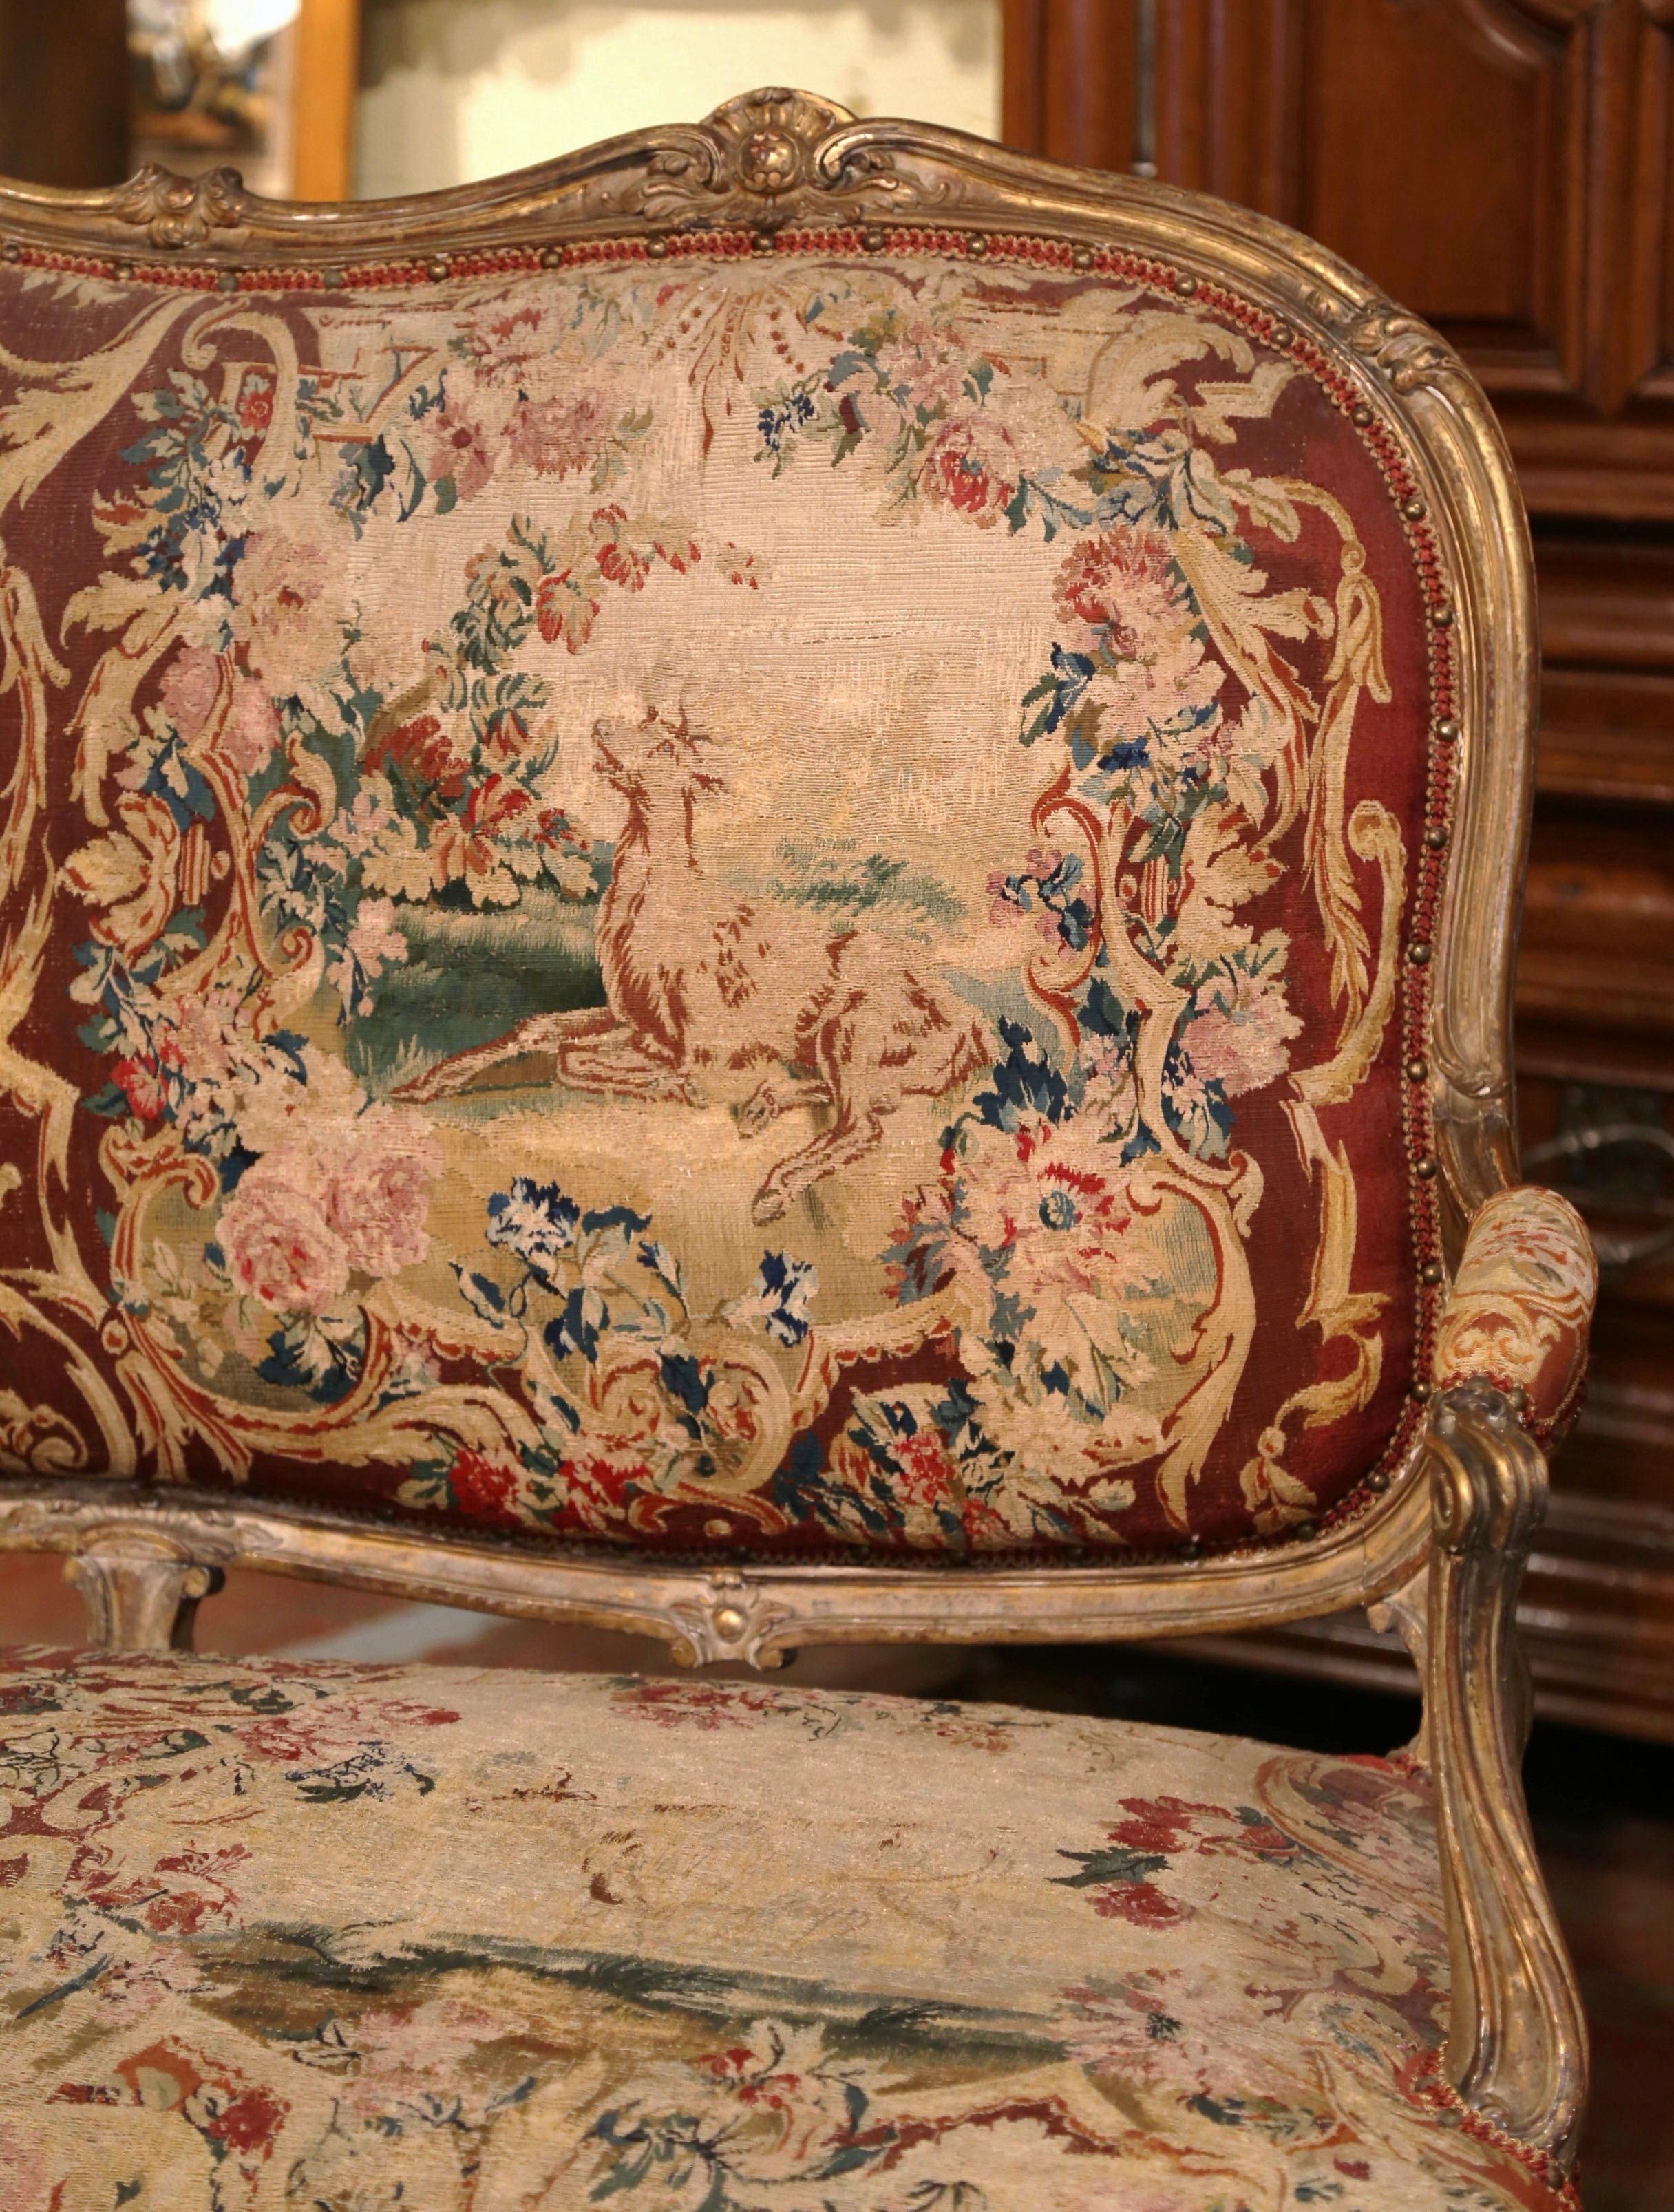 Hand-Painted 18th Century French Louis XV Carved Giltwood Canapé with Aubusson Tapestry For Sale